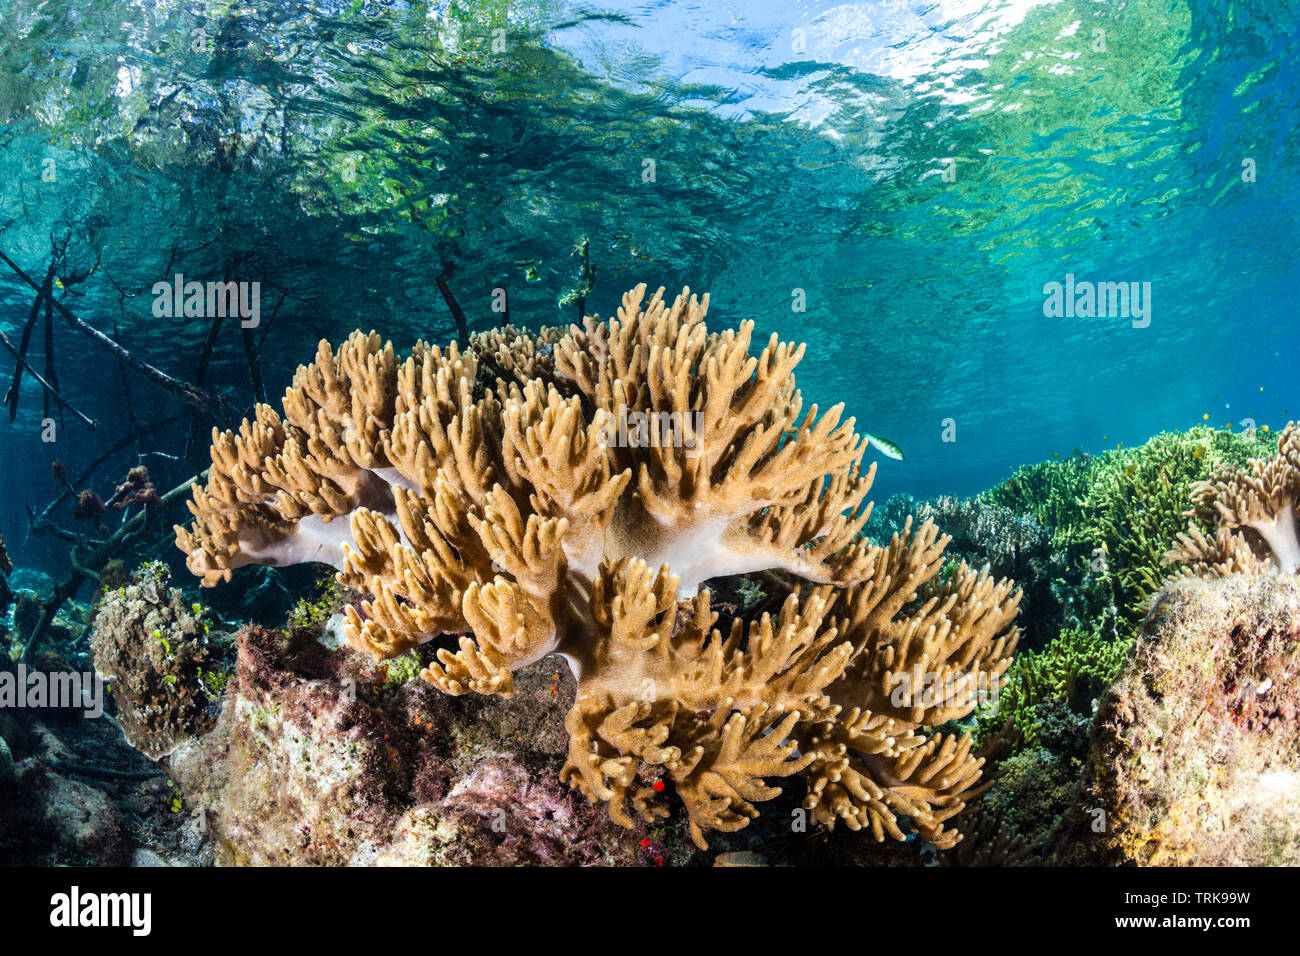 Leather Soft Corals growing in Mangroves, Sinularia, Lissenung, New Ireland, Papua New Guinea Stock Photo